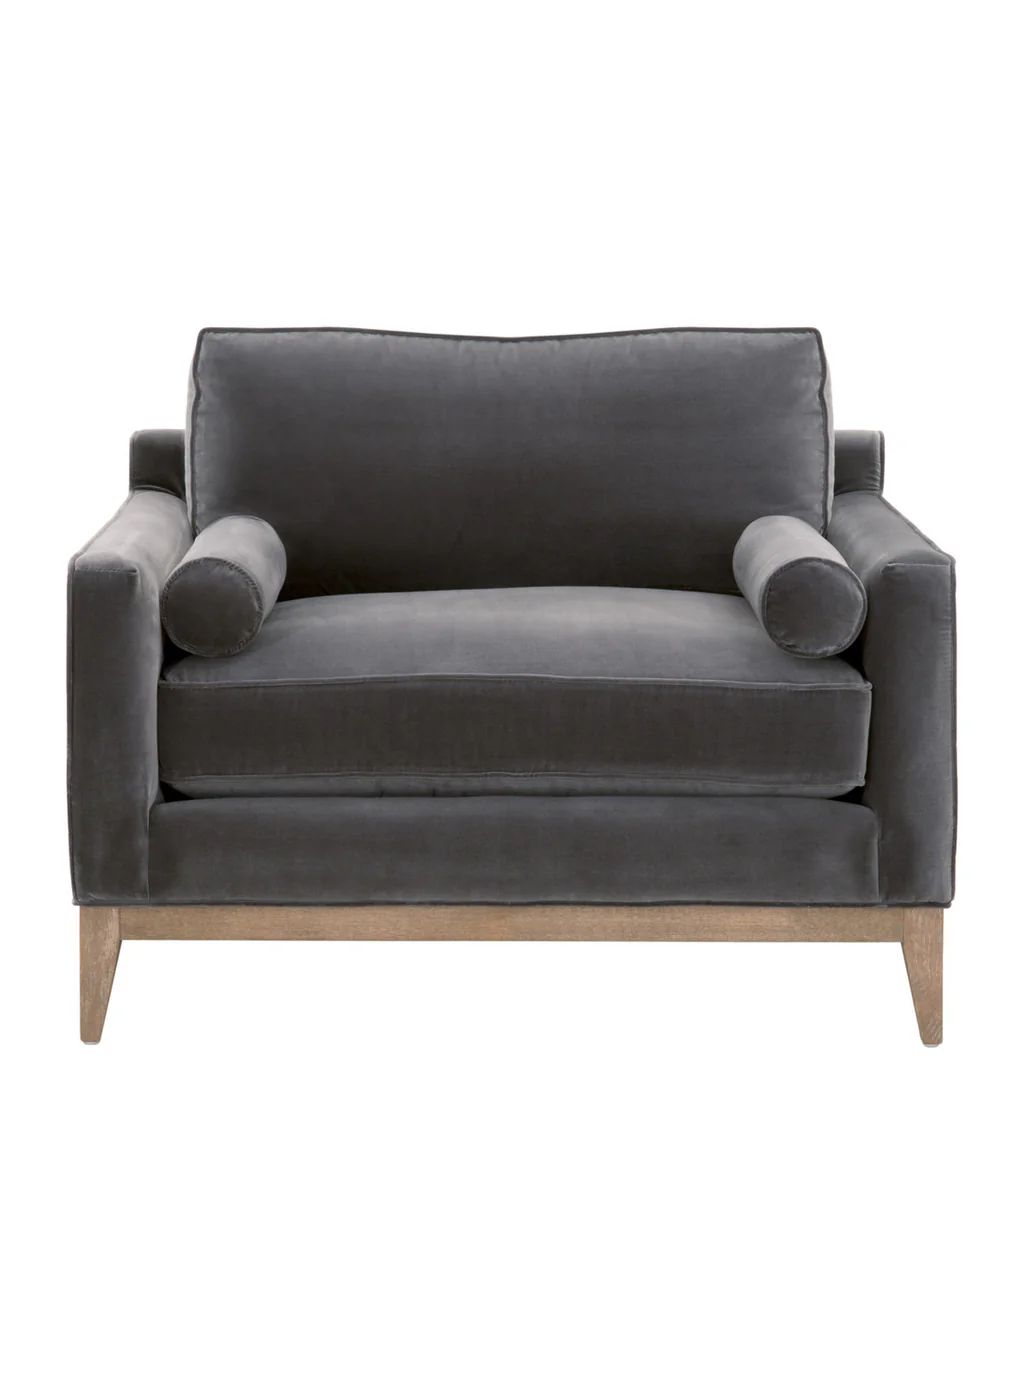 Grant Sofa Chair | House of Jade Home